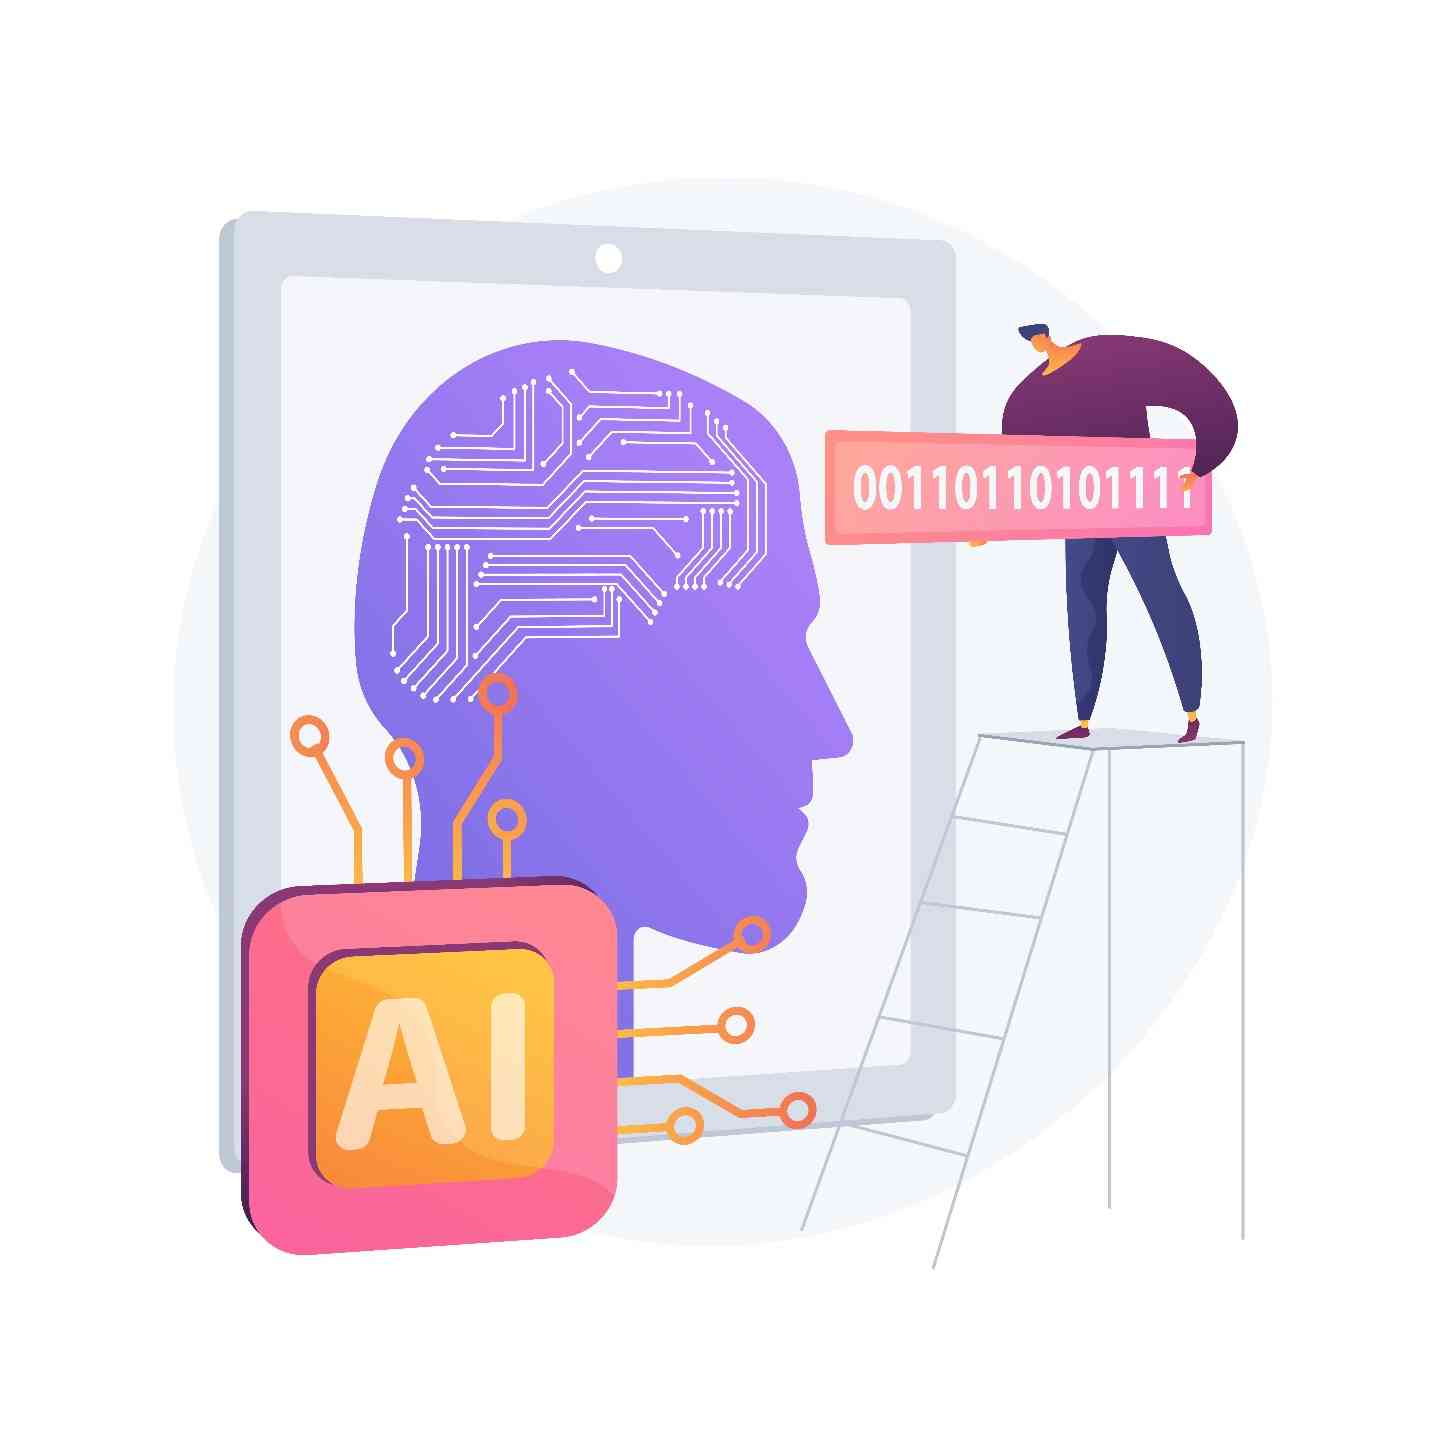 main applications of content production with artificial intelligence